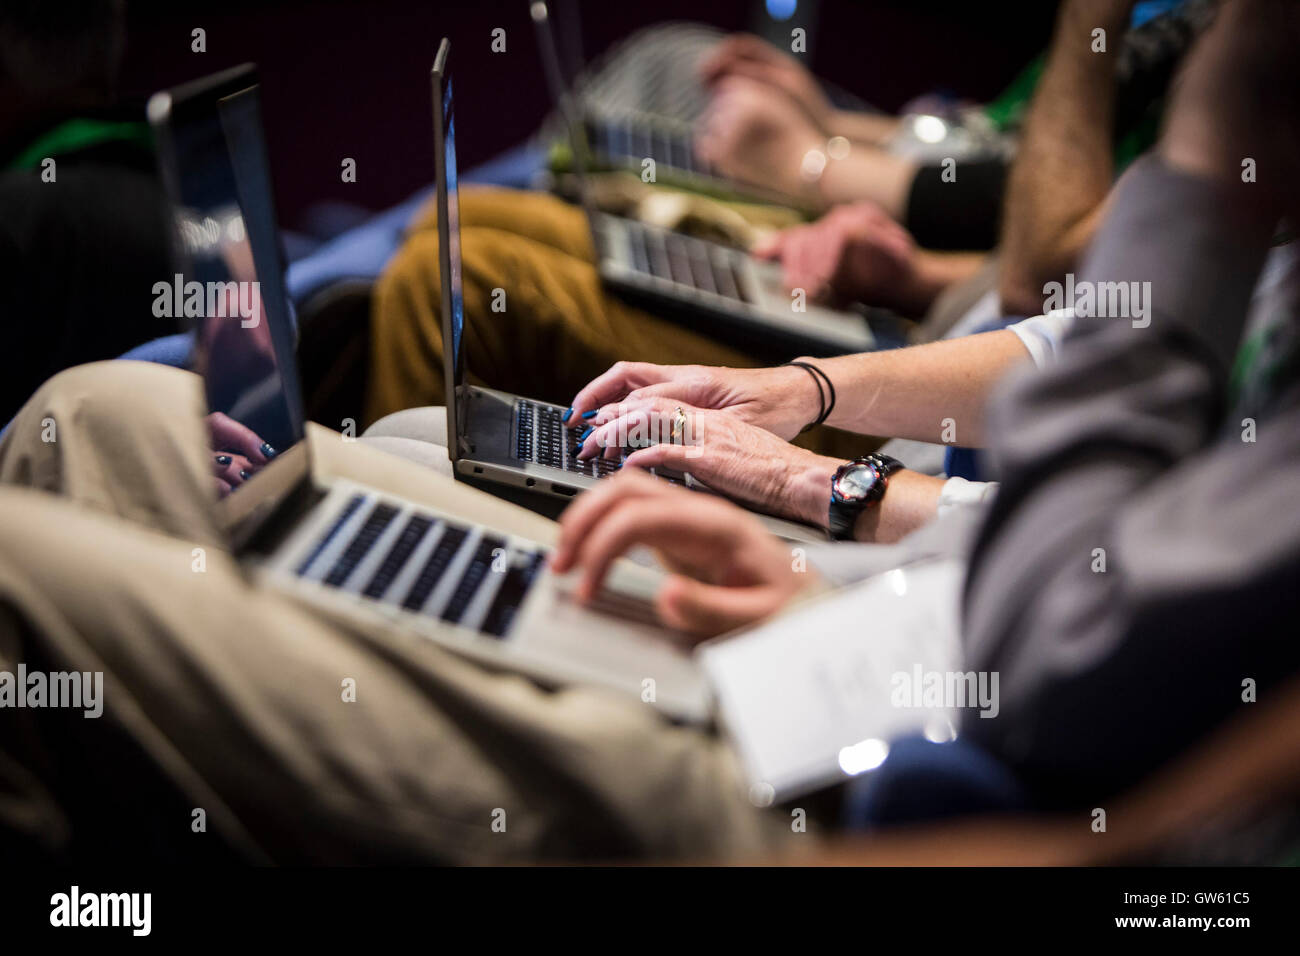 a row of people using Apple MacBooks during a conference Stock Photo